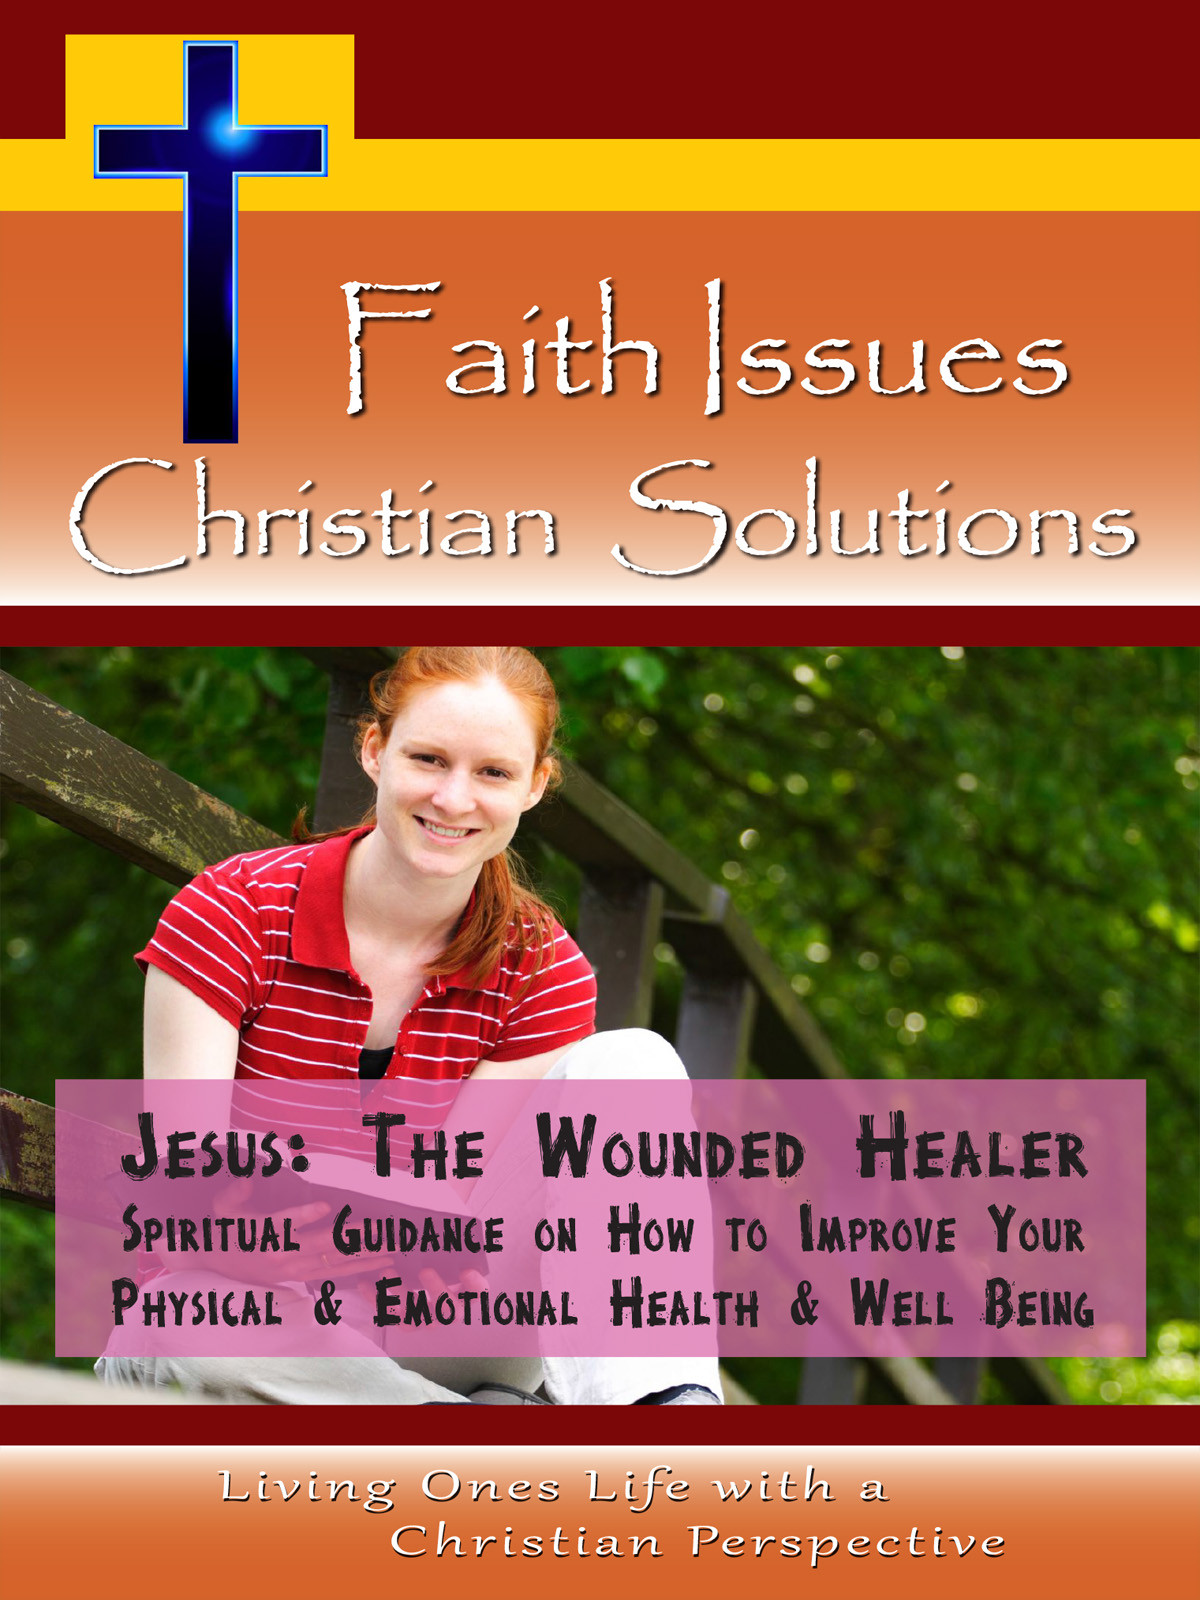 CH10040 - Jesus, Wounded Healer Spiritual Guidance on How to Improve Your Physical & Emotional Health & Well Being